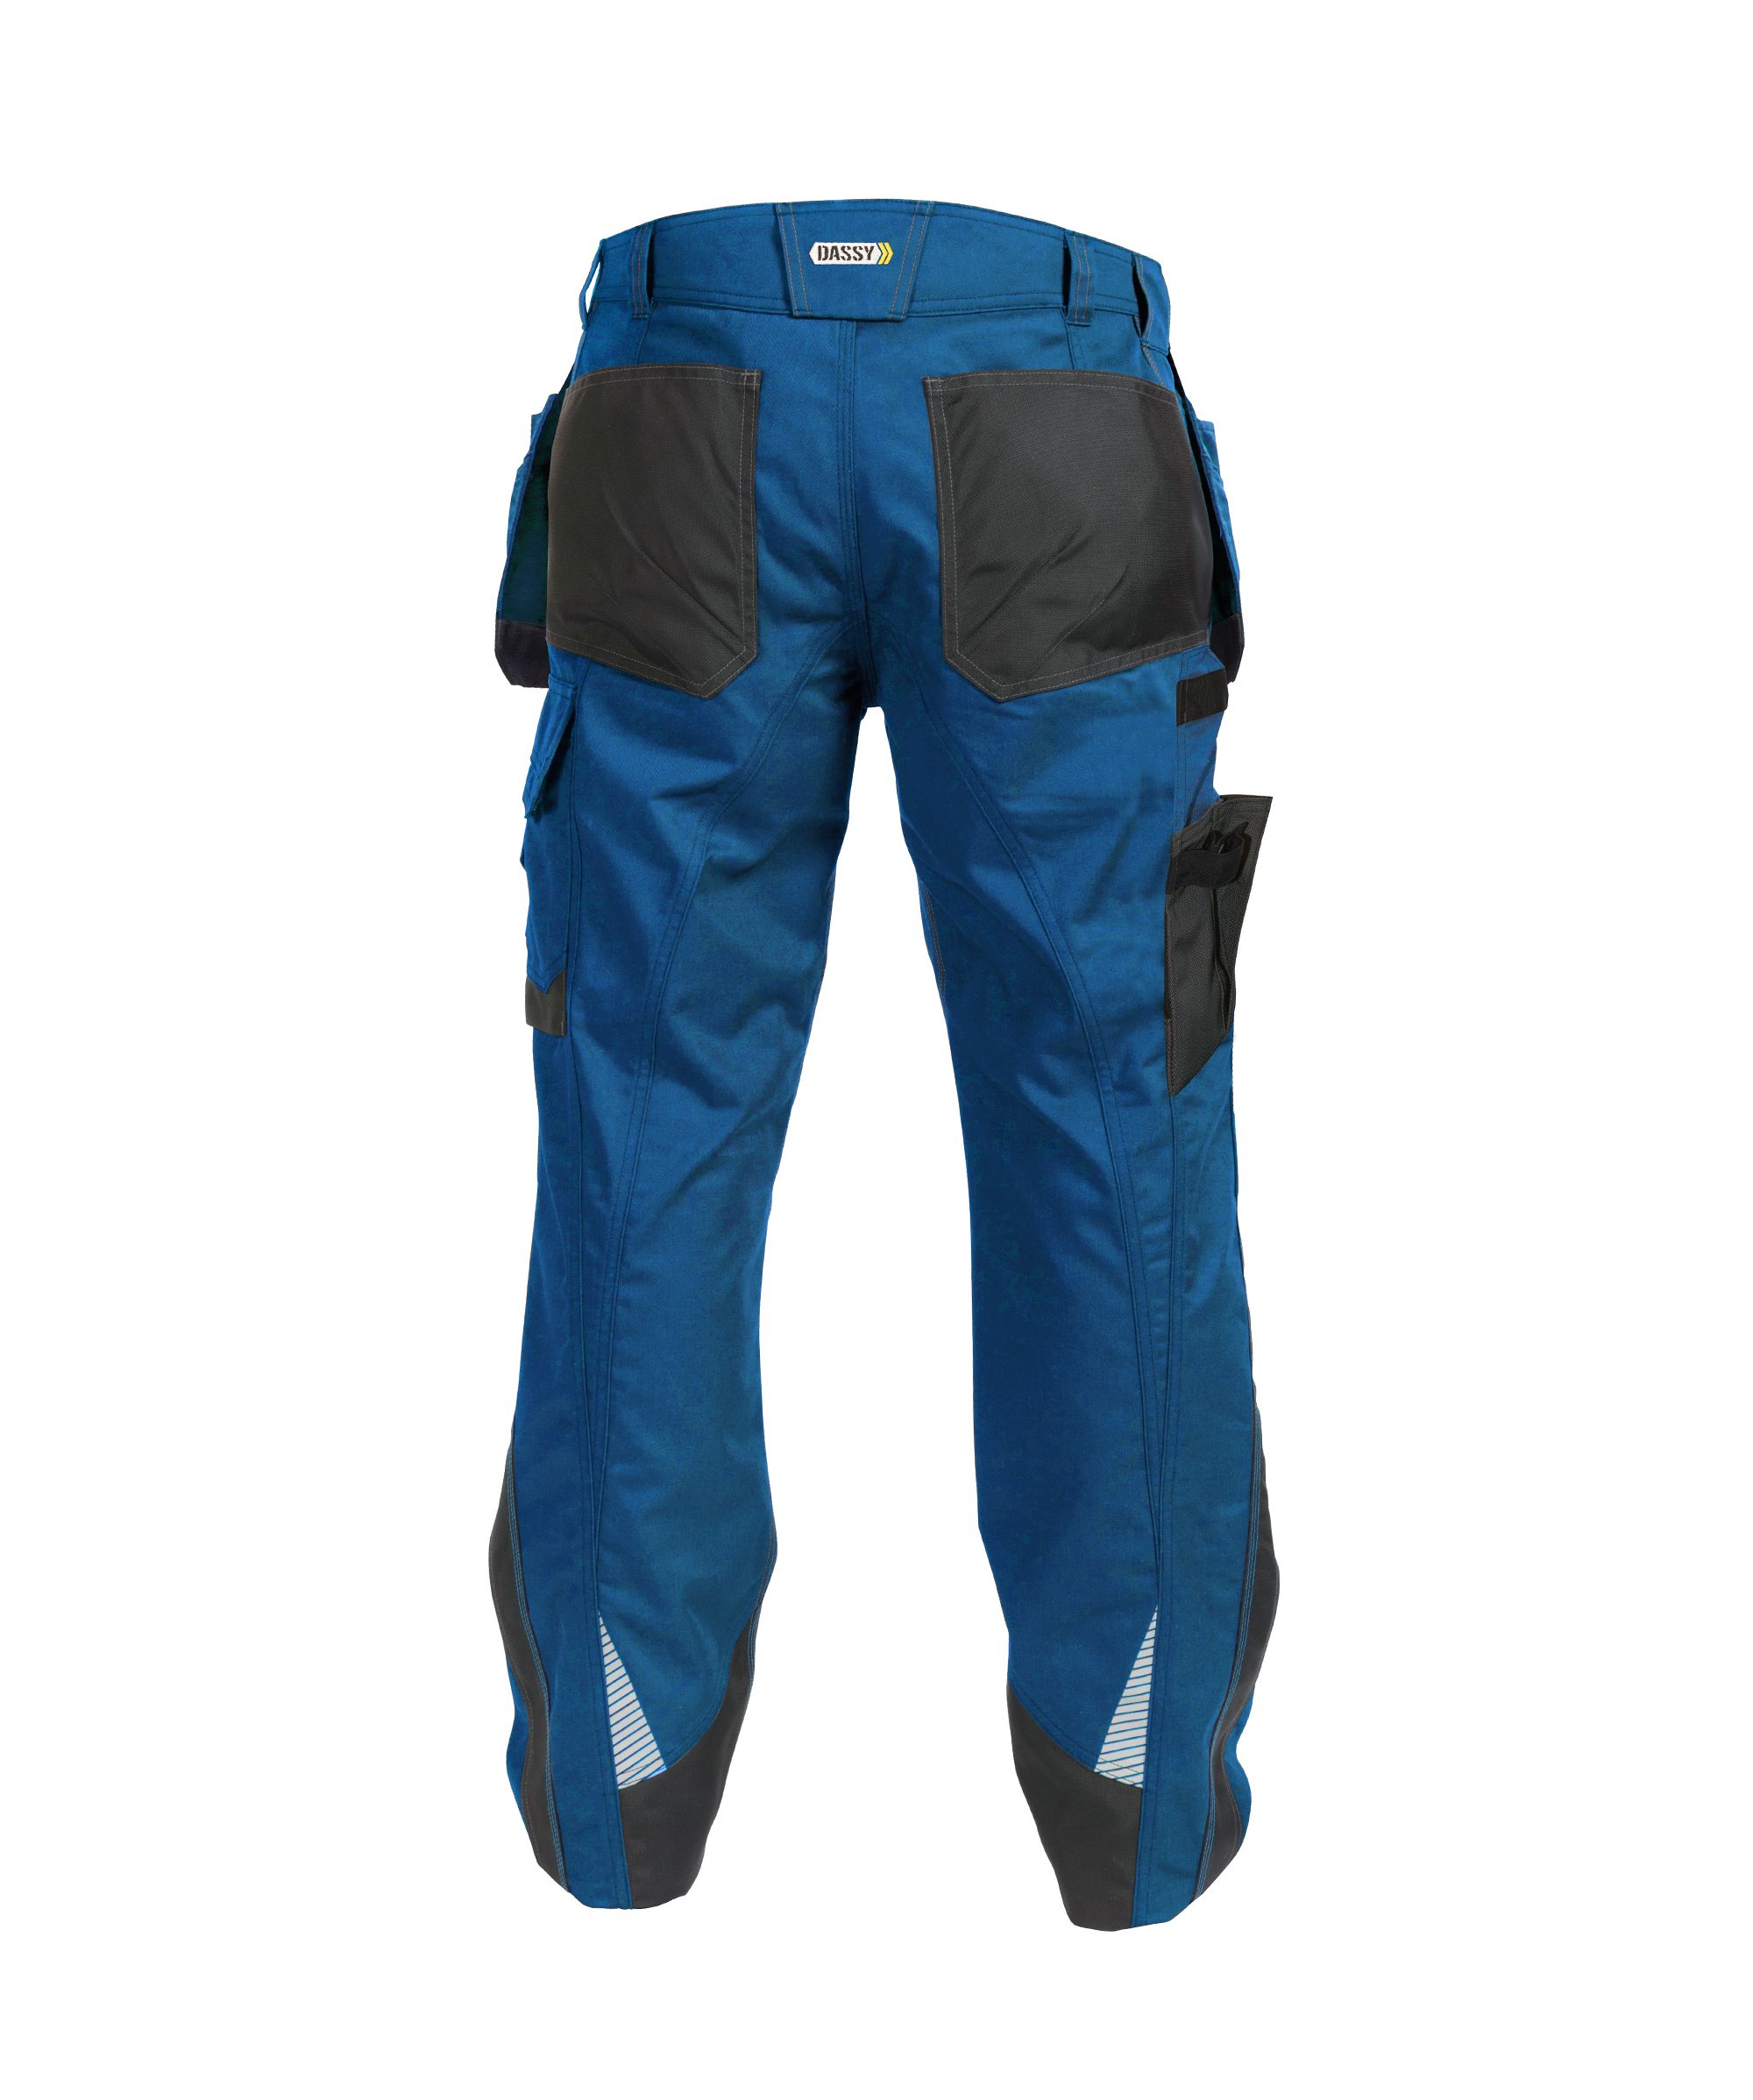 magnetic_two-tone-work-trousers-with-multi-pockets-and-knee-pockets_azure-blue-anthracite-grey_back.jpg